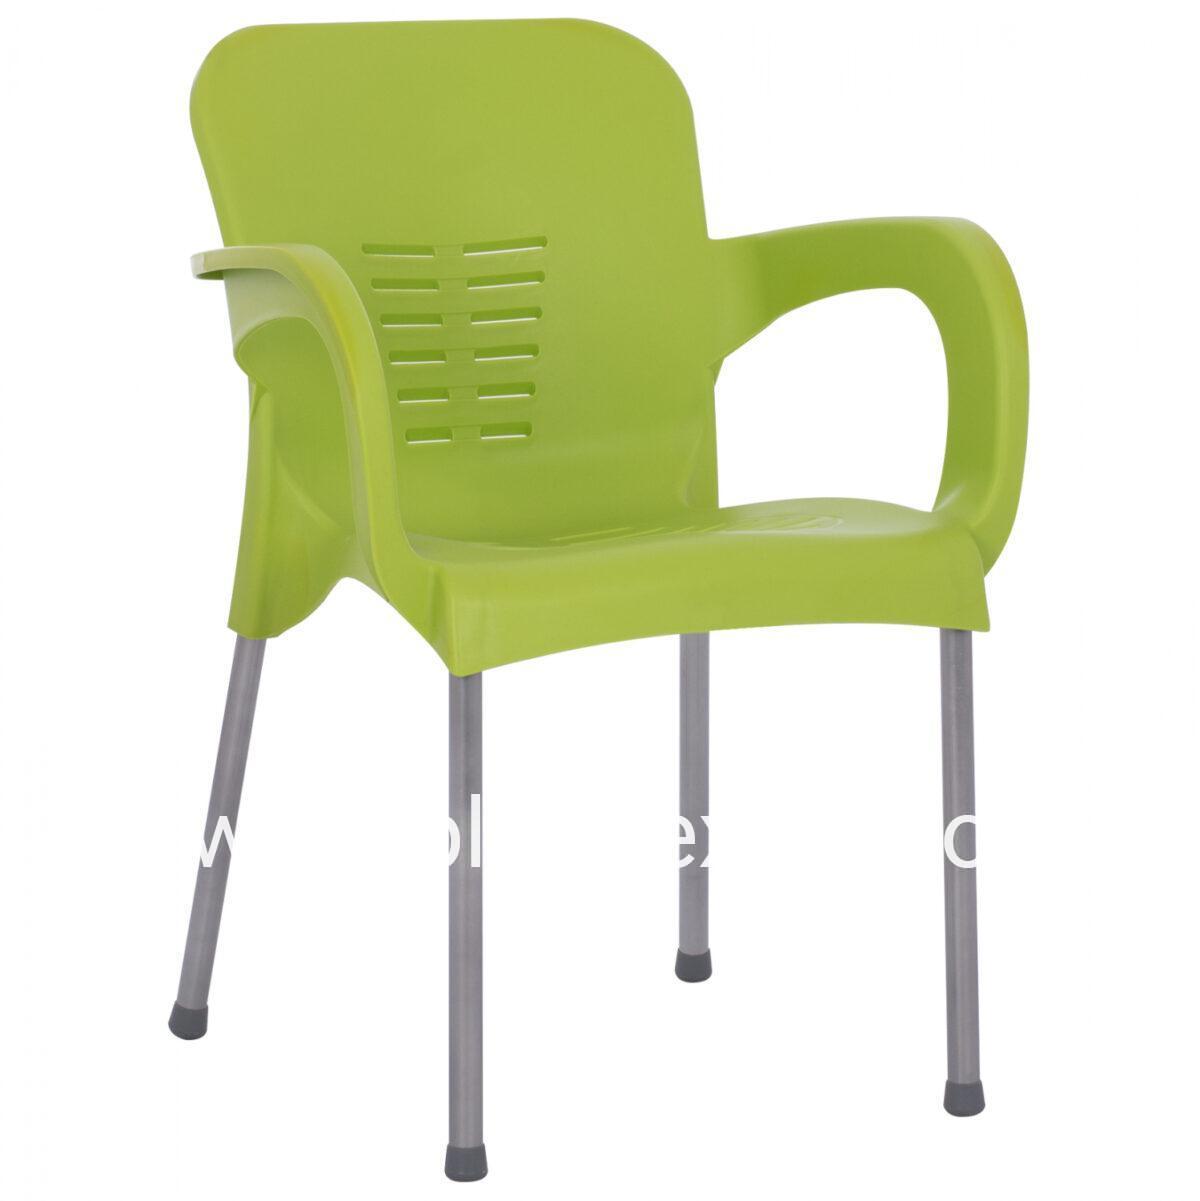 RECYCLED POLYPROPYLENE ARMCHAIR HM5592.17 GREEN COLOR 59